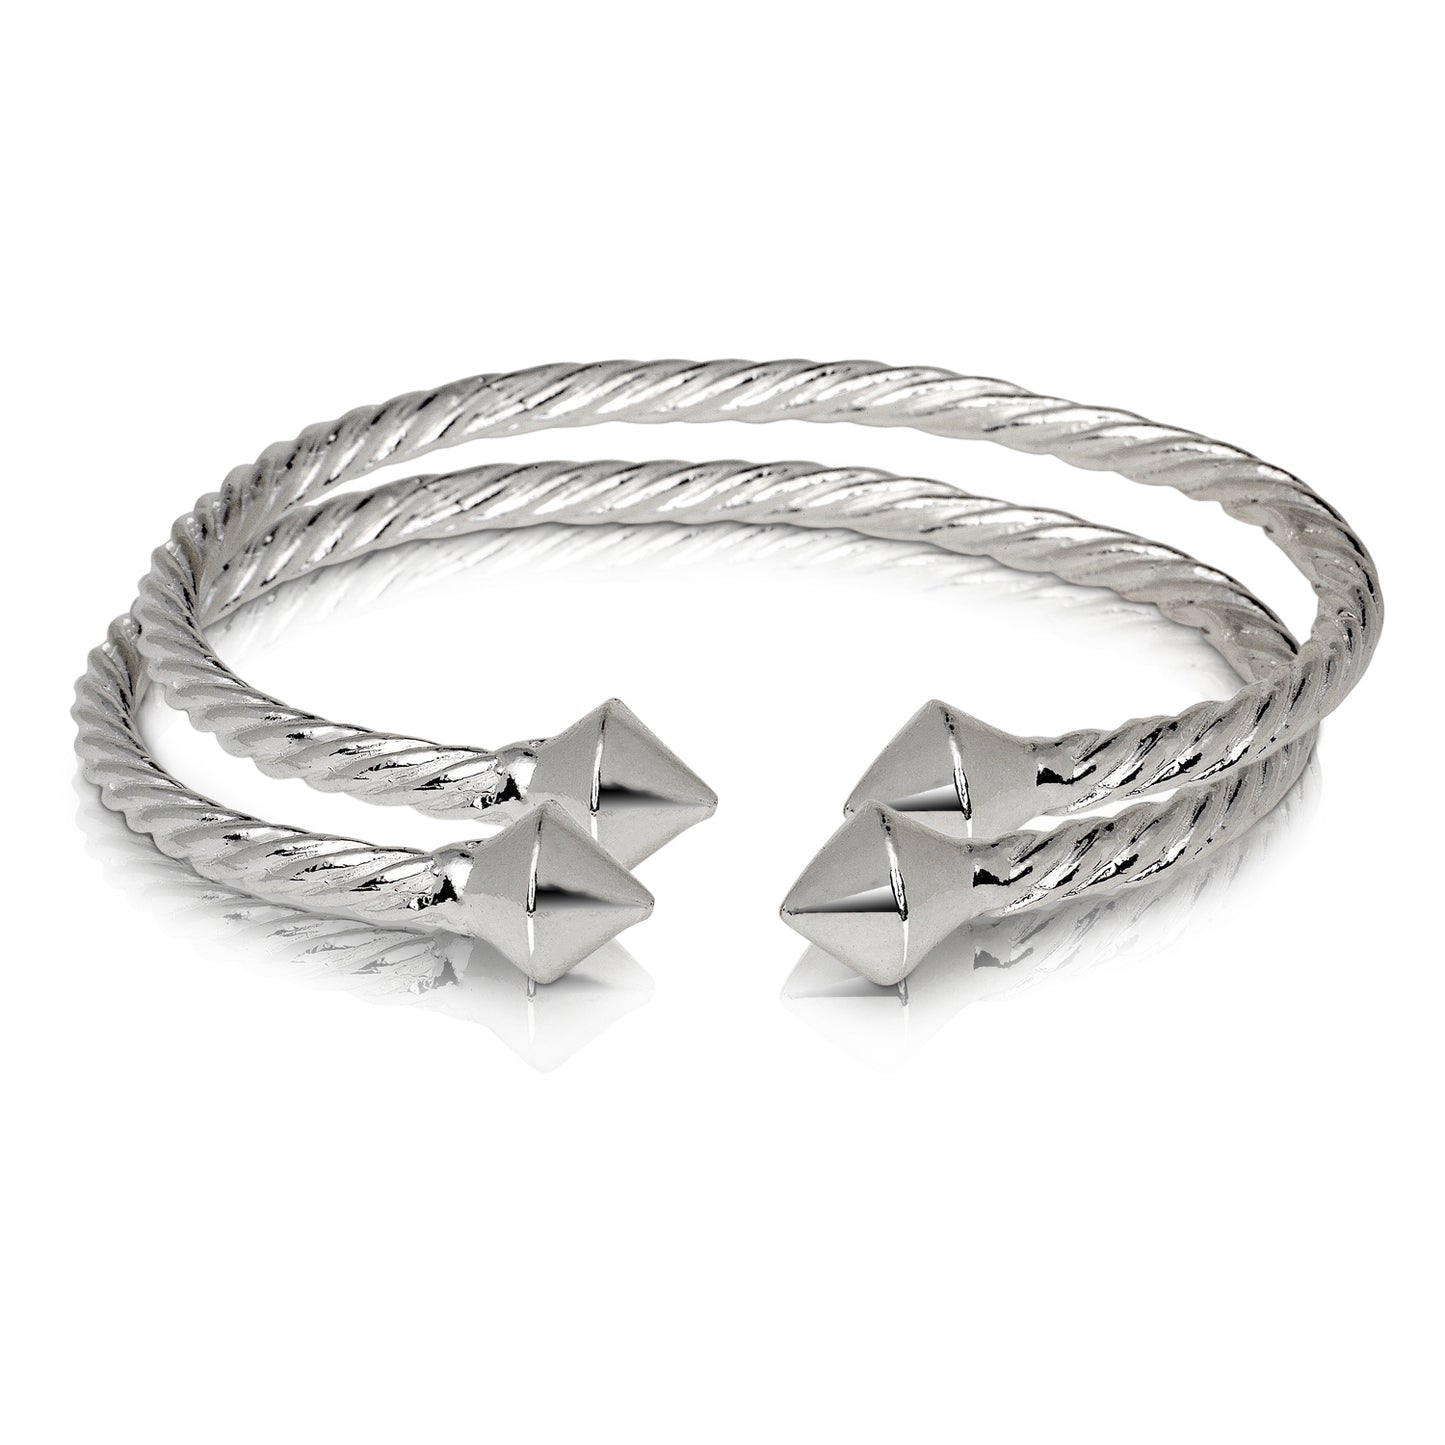 Better Jewelry, Thick Pyramid Coiled Rope Silver West Indian Bangles, 1 pair